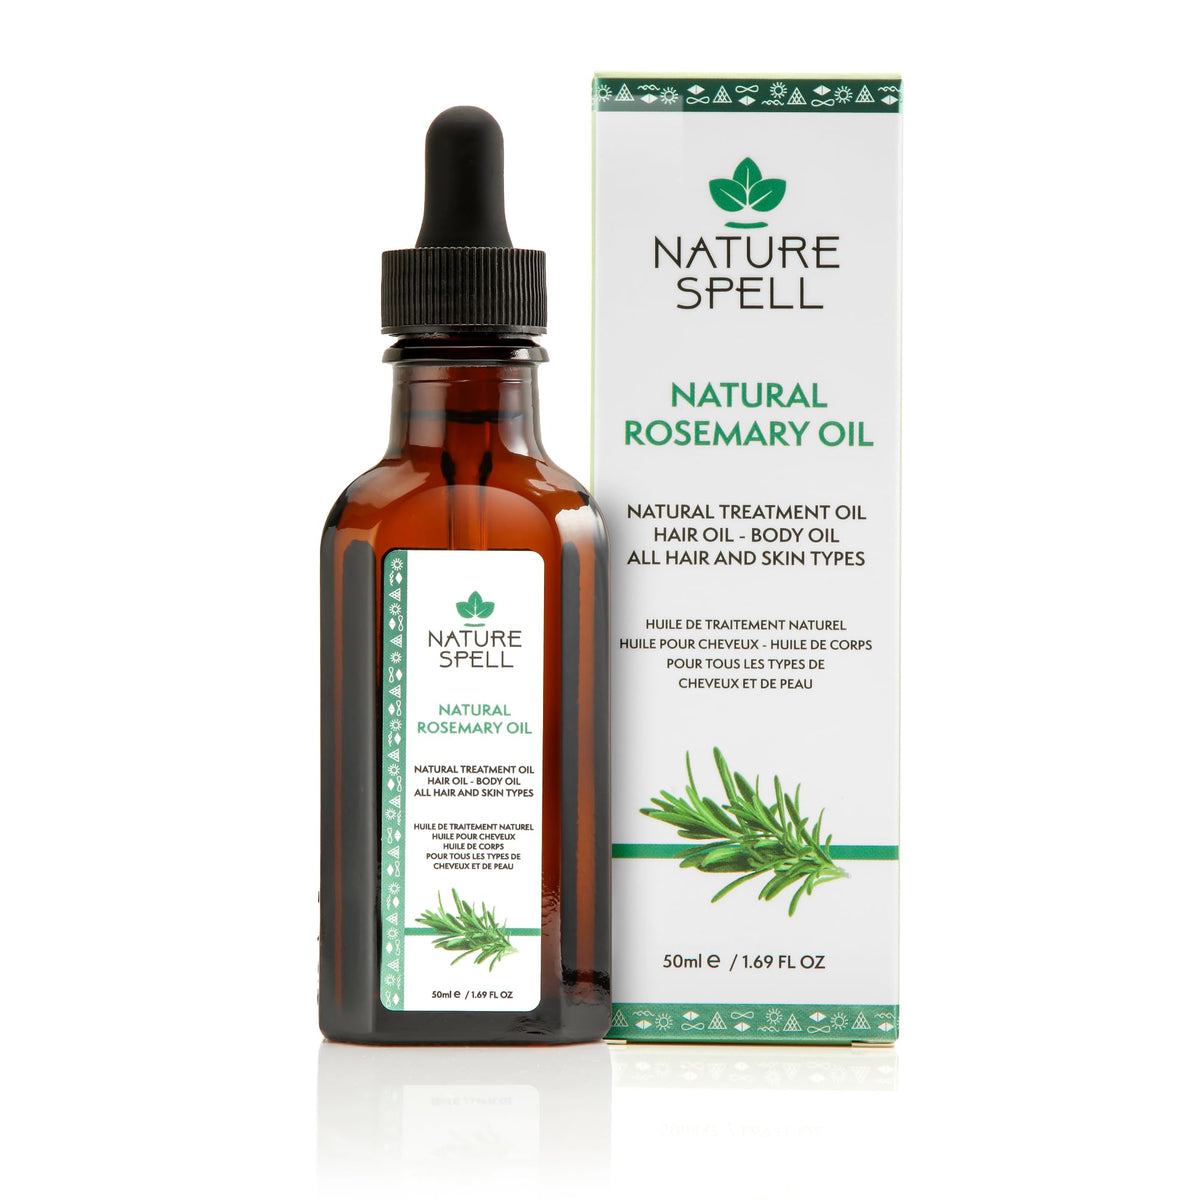 Nature Spell Rosemary Oil for Hair Travel Size 50ml with Pipette - Rosemary Oil for Hair Growth - Treat Dry Damaged Hair to Target Hair Loss - Pre-Diluted - Made in the UK